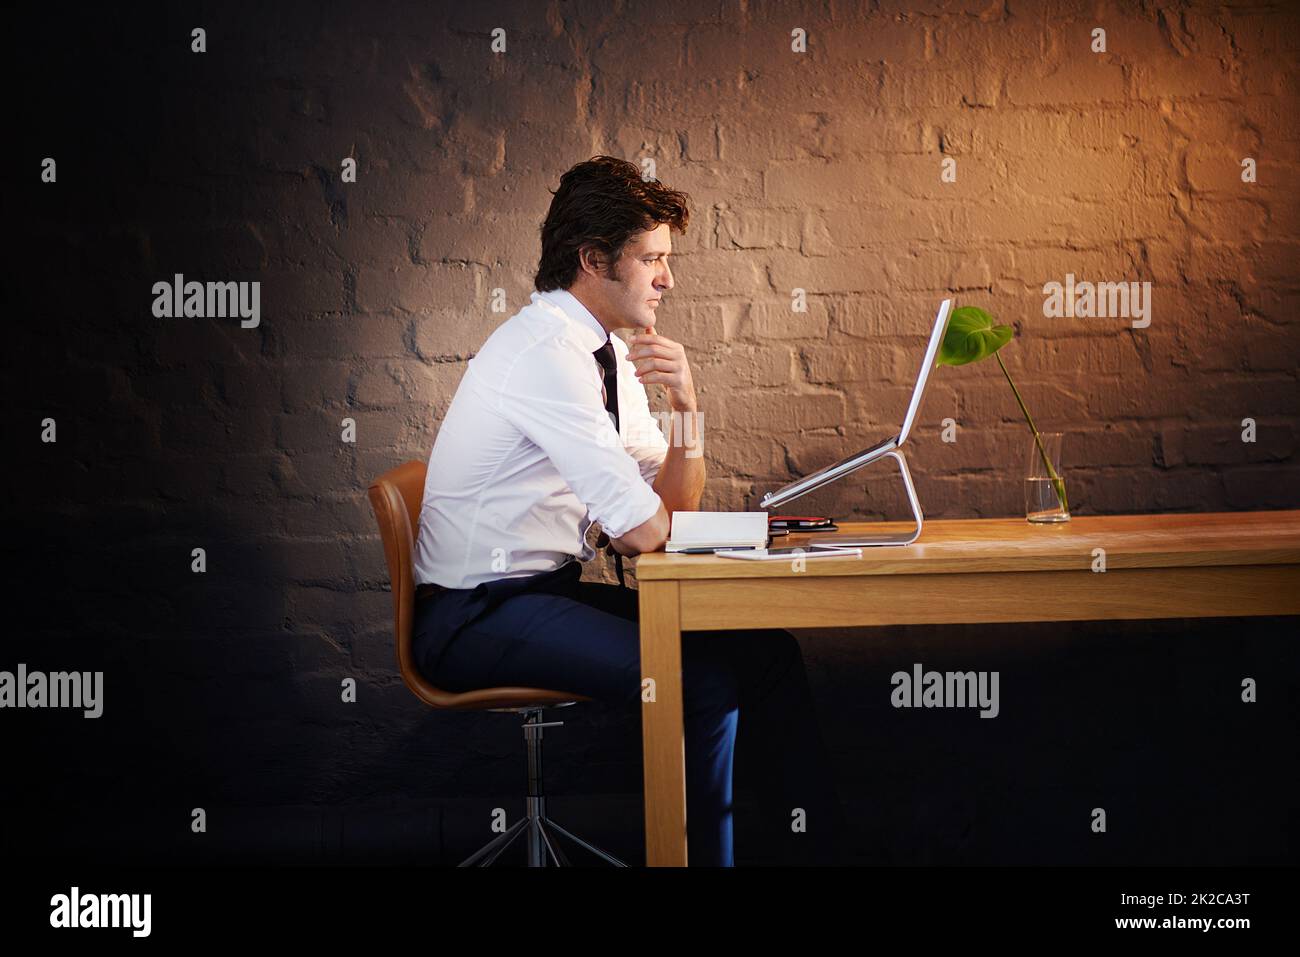 First one to arrive, last one to leave. Shot of a businessman working late at the office. Stock Photo